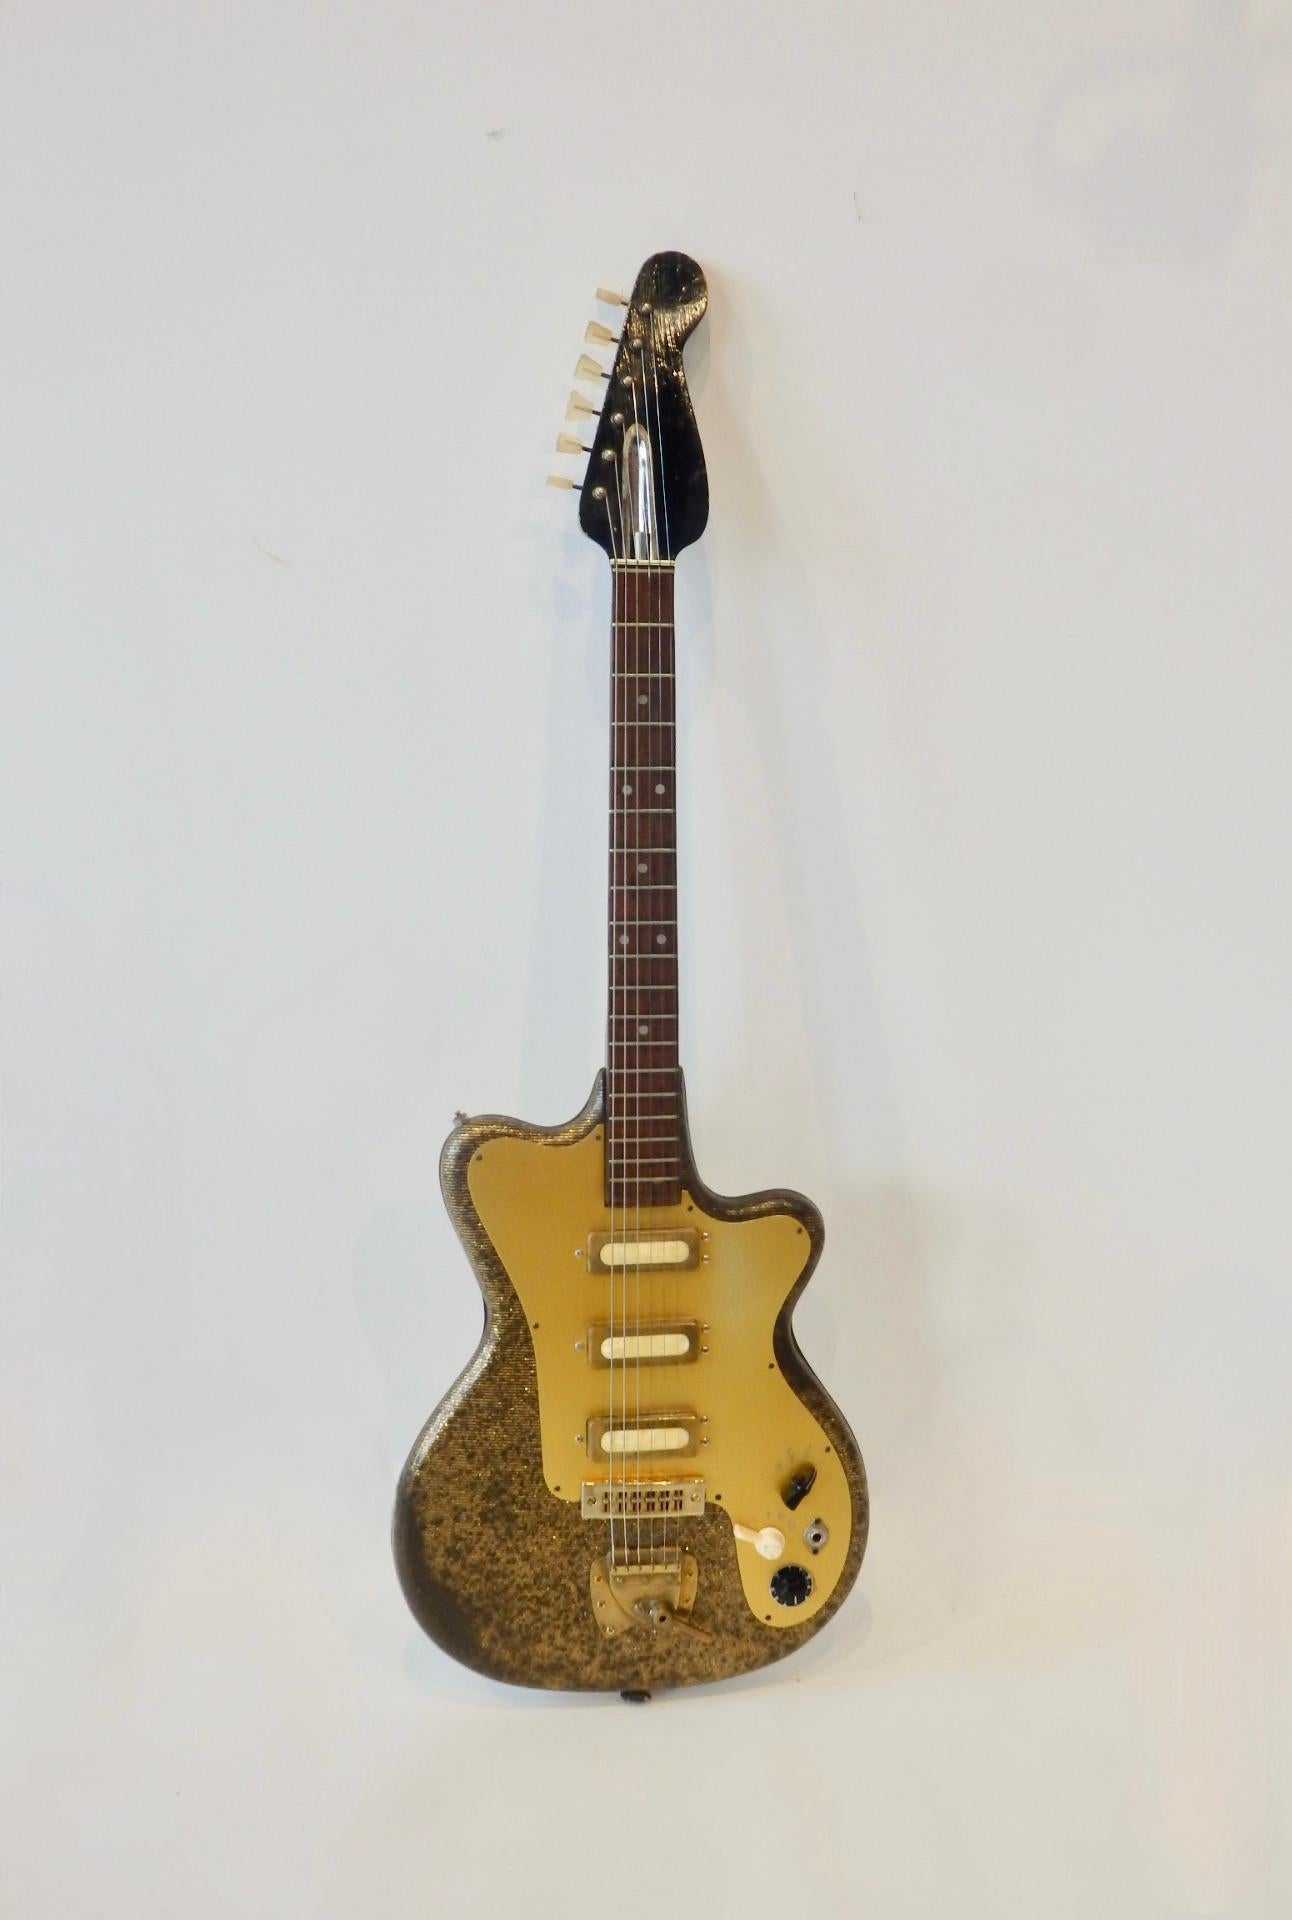 Early and scarce German solid body electric guitar. Crafted by Fasan guitars . Body is wrapped in a gold metal flake  with black line detail covering. An interesting early guitar that was well loved and has more to give. Fretboard appears to be